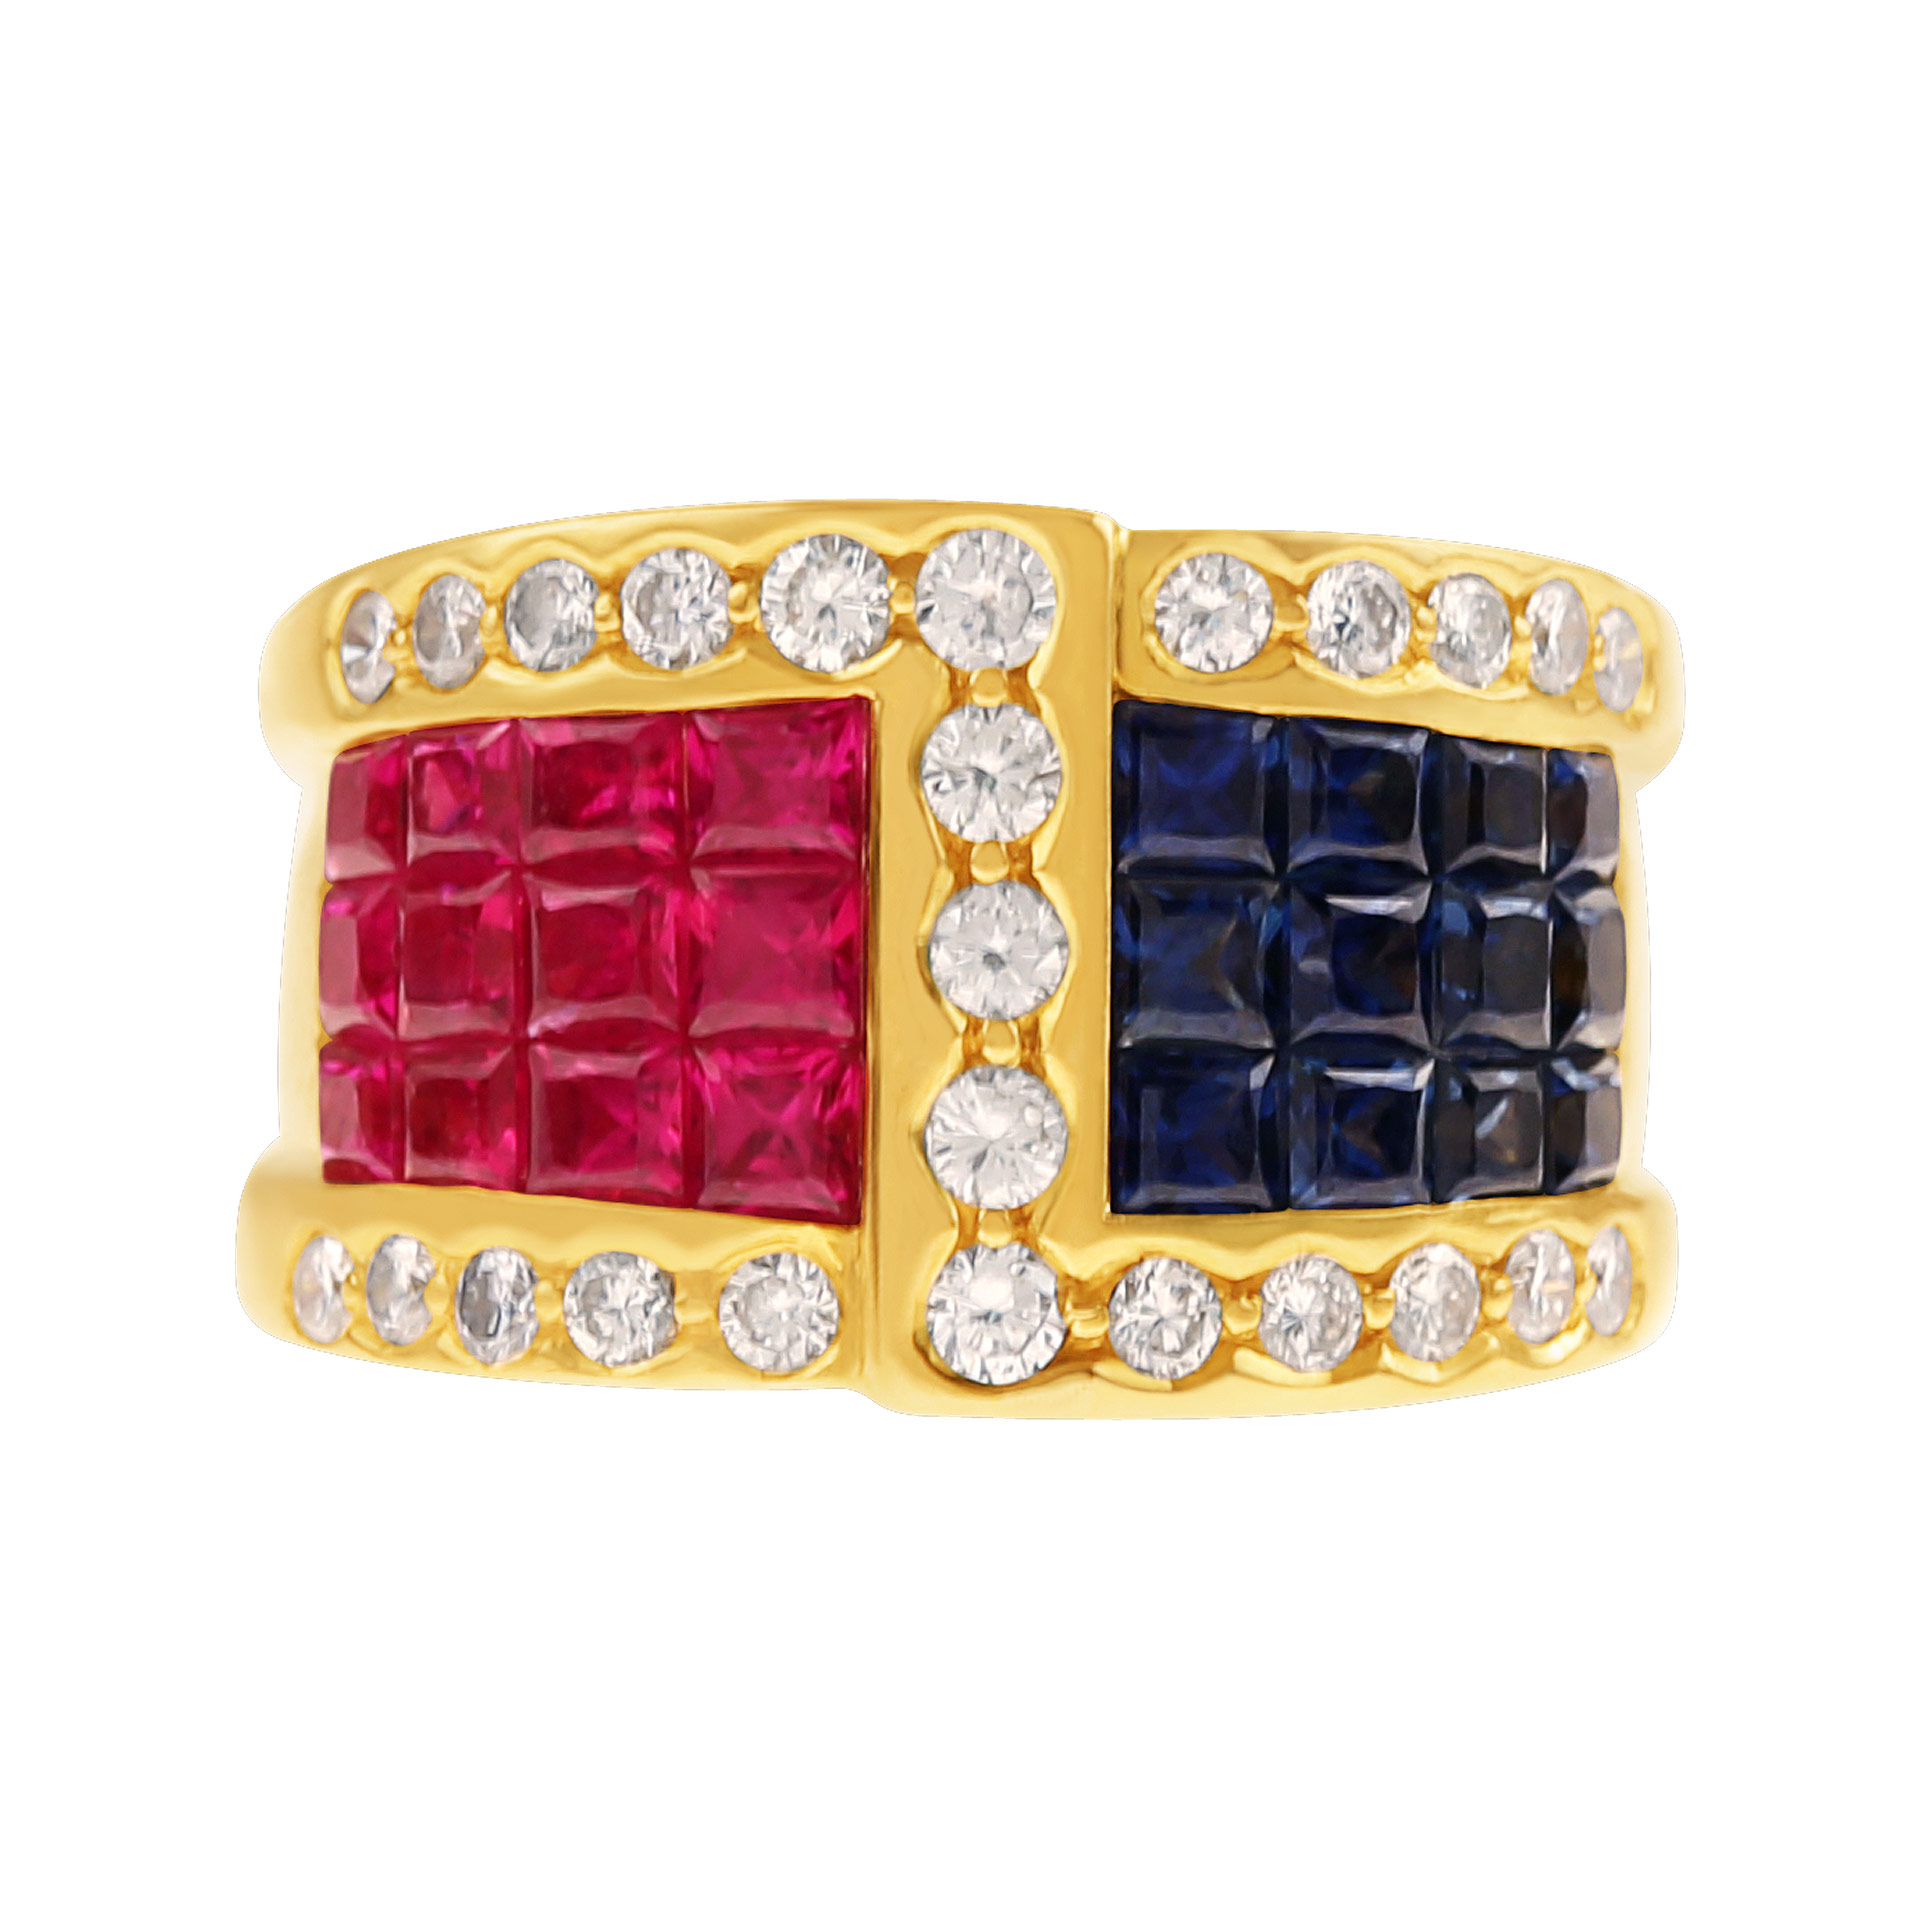 Sapphire, ruby & diamond ring in 18k yellow gold. image 1